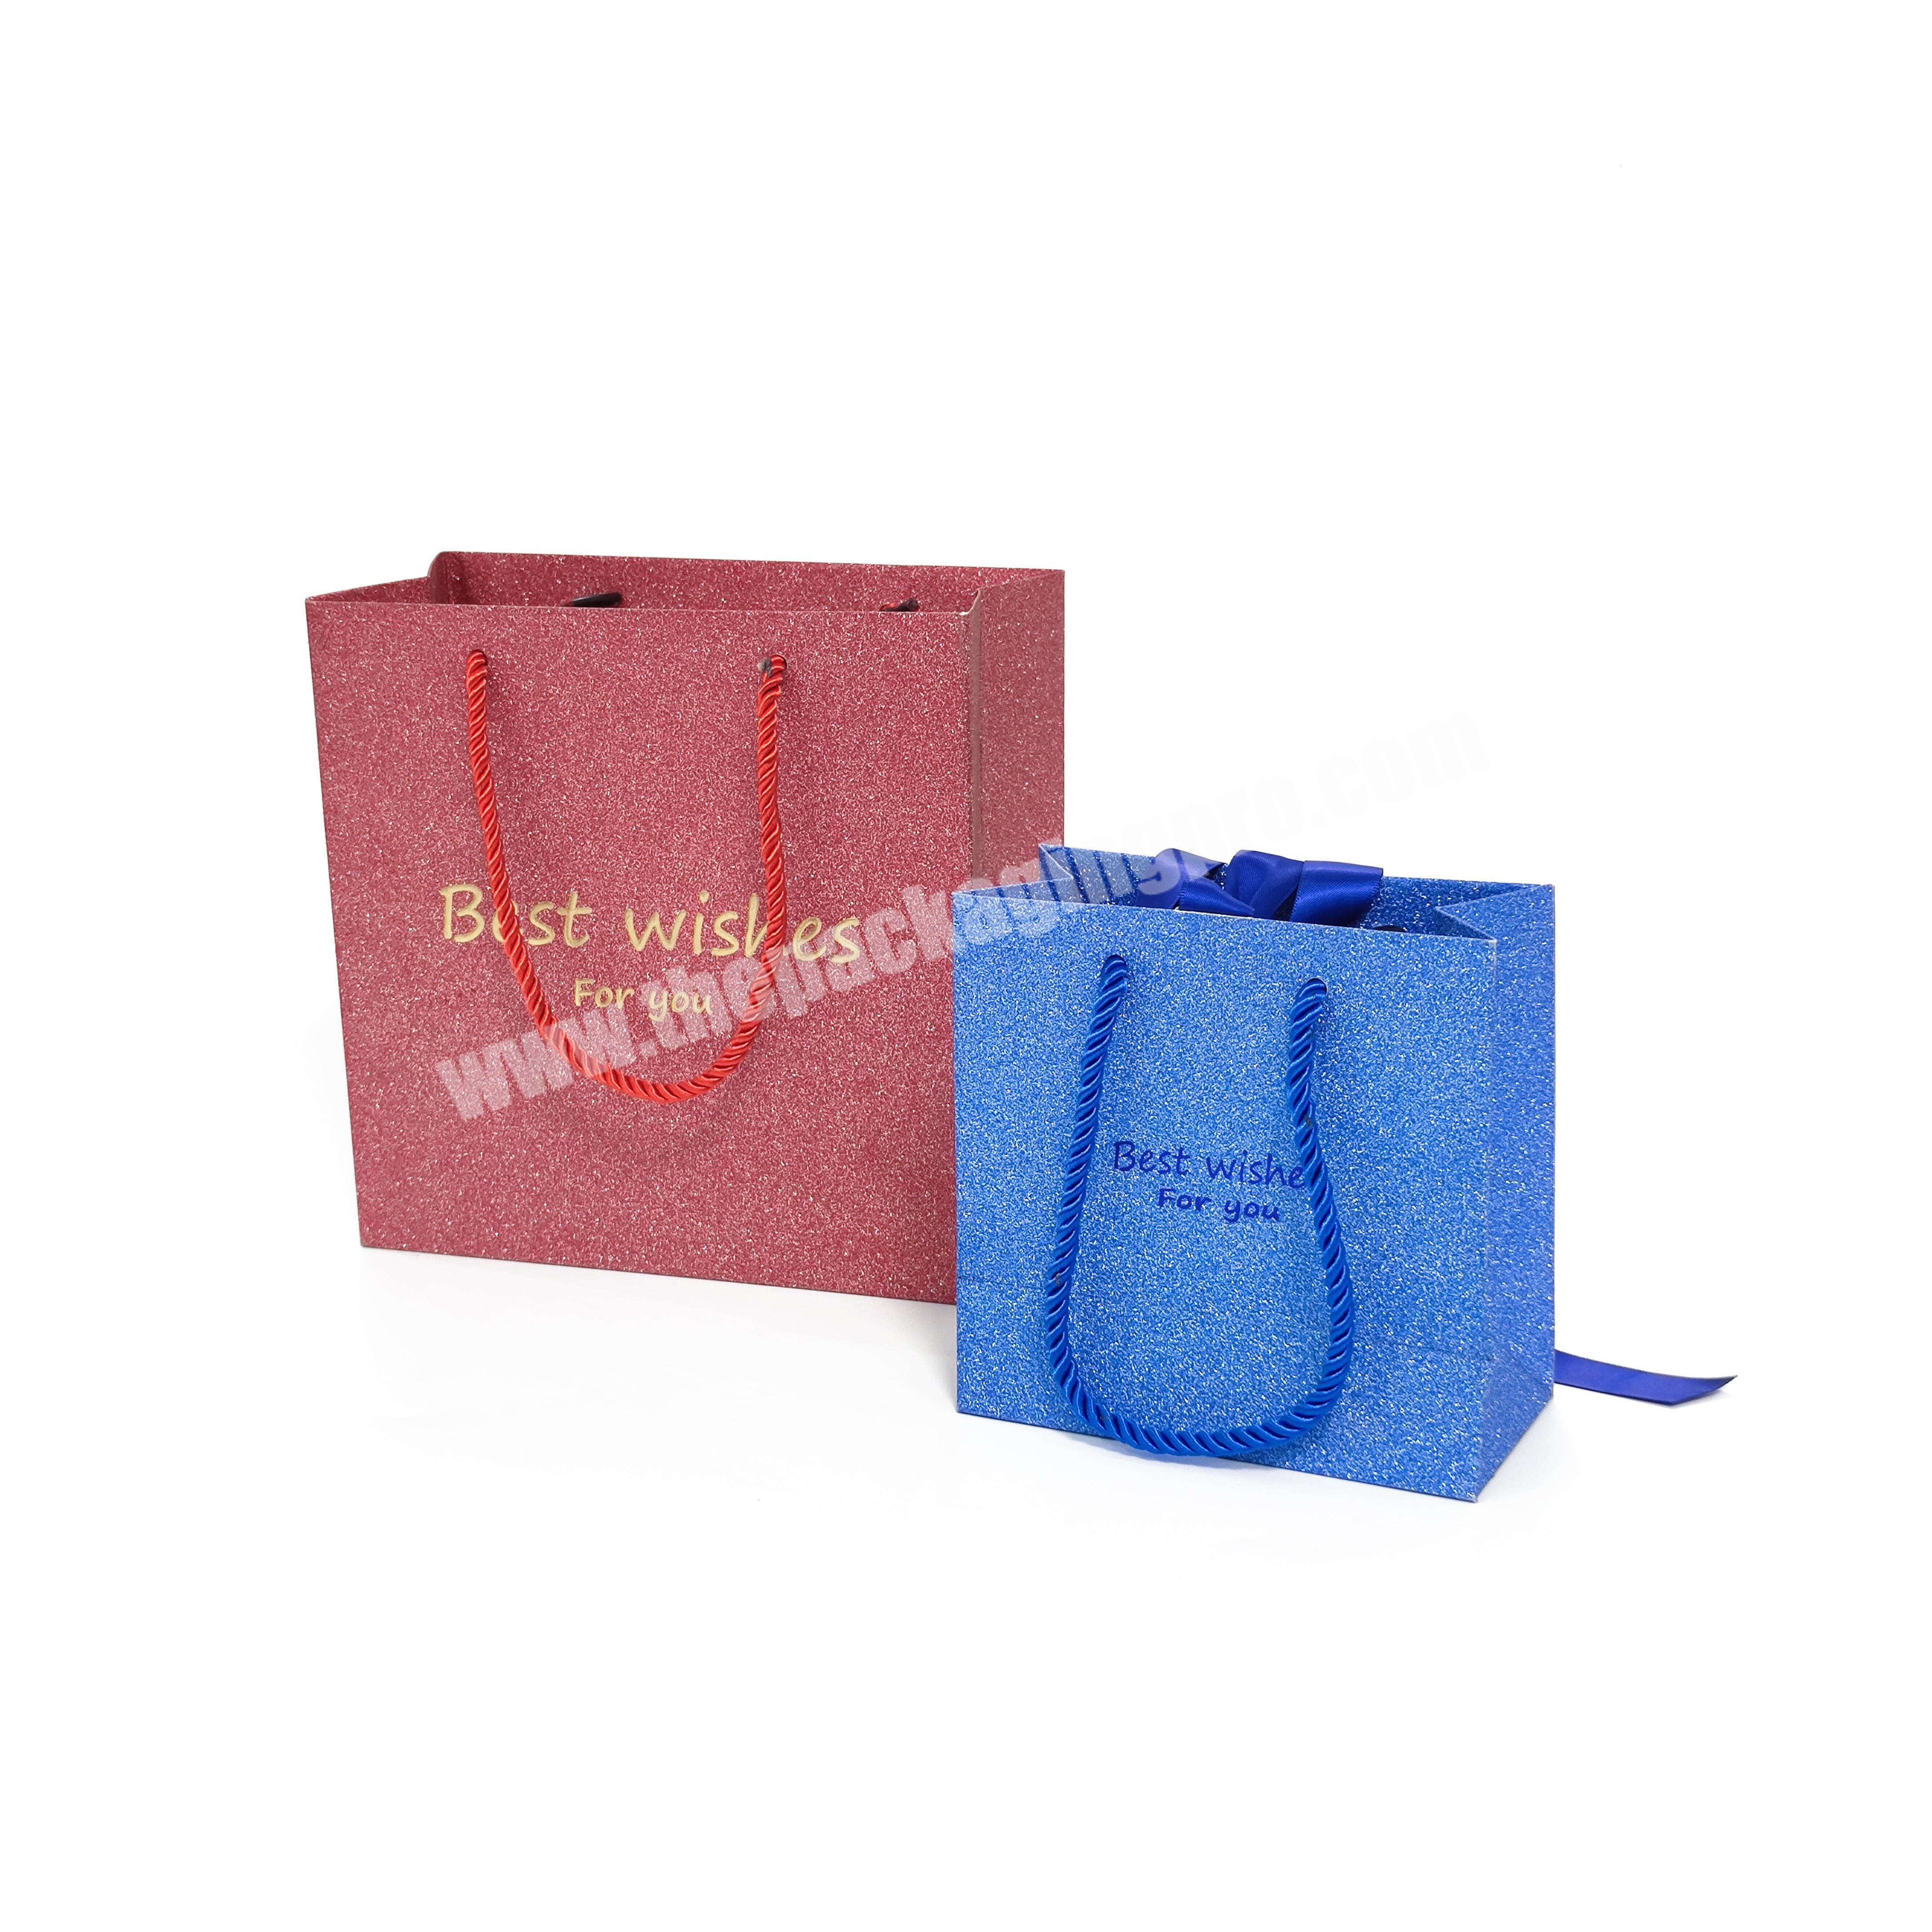 Factory Direct High Quality China Wholesale Factory Purses And Handbags  Luxury Women High Quality Designer Handbags Famous Brands Bags Retail  Wholesale Fashion Bags $23 from Quanzhou Licheng Sanhexing Trading Co., Ltd  |